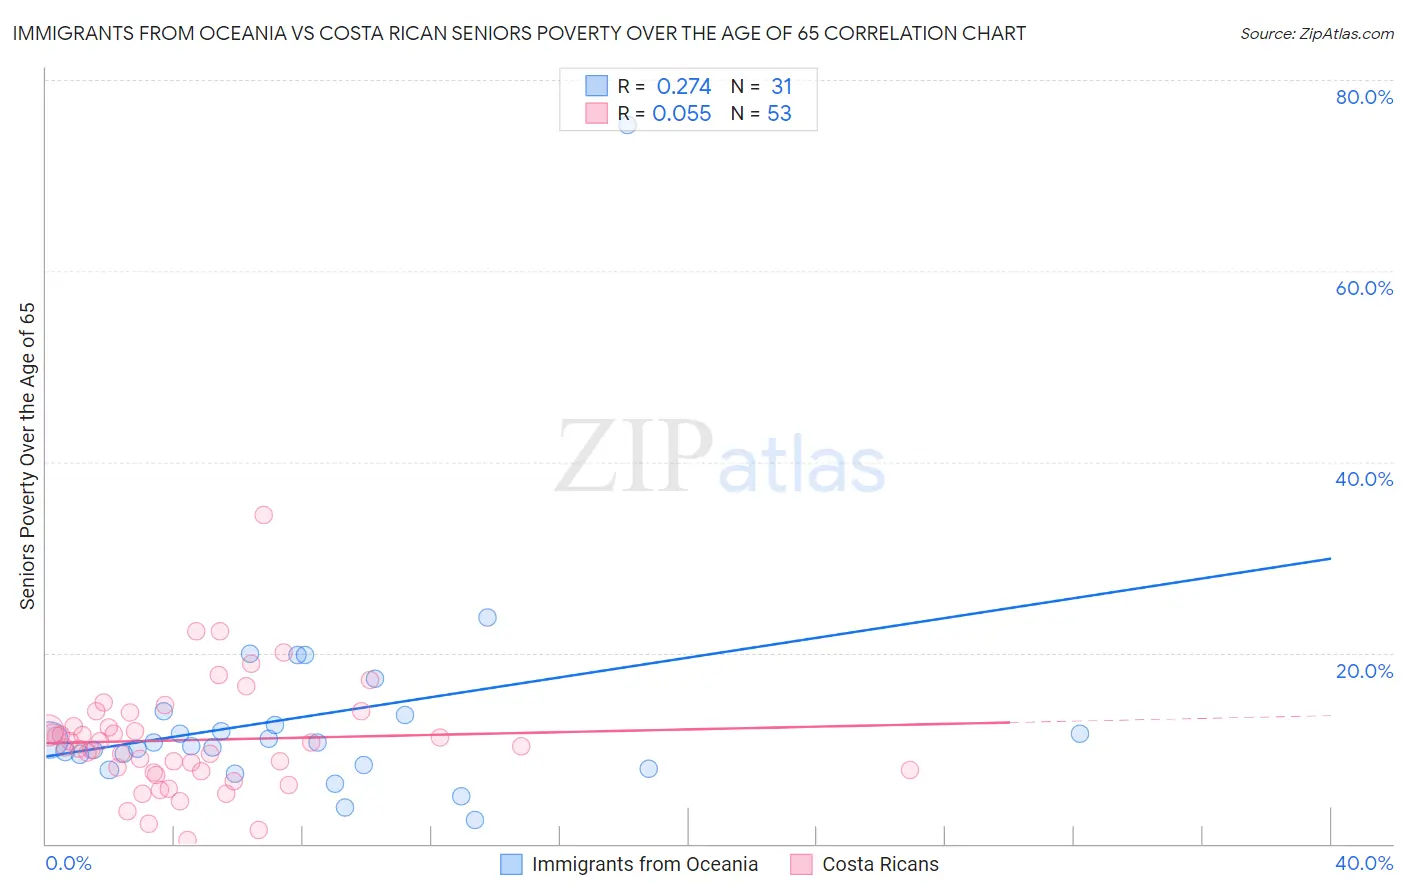 Immigrants from Oceania vs Costa Rican Seniors Poverty Over the Age of 65